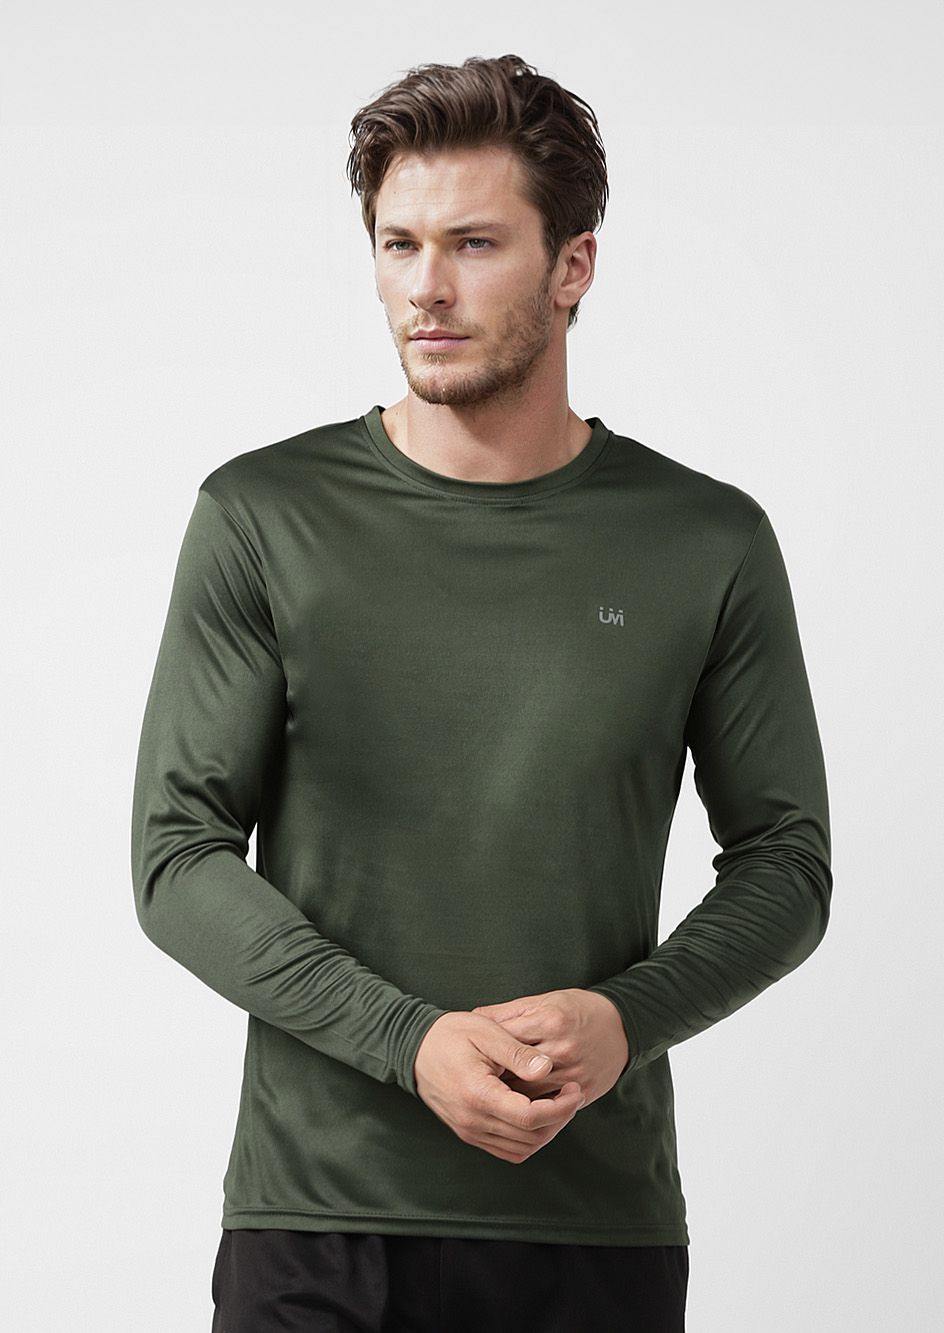     			UrbanMark Mens Regular Fit Quick Dry Sports Round Neck Full Sleeves Solid T Shirt -Olive